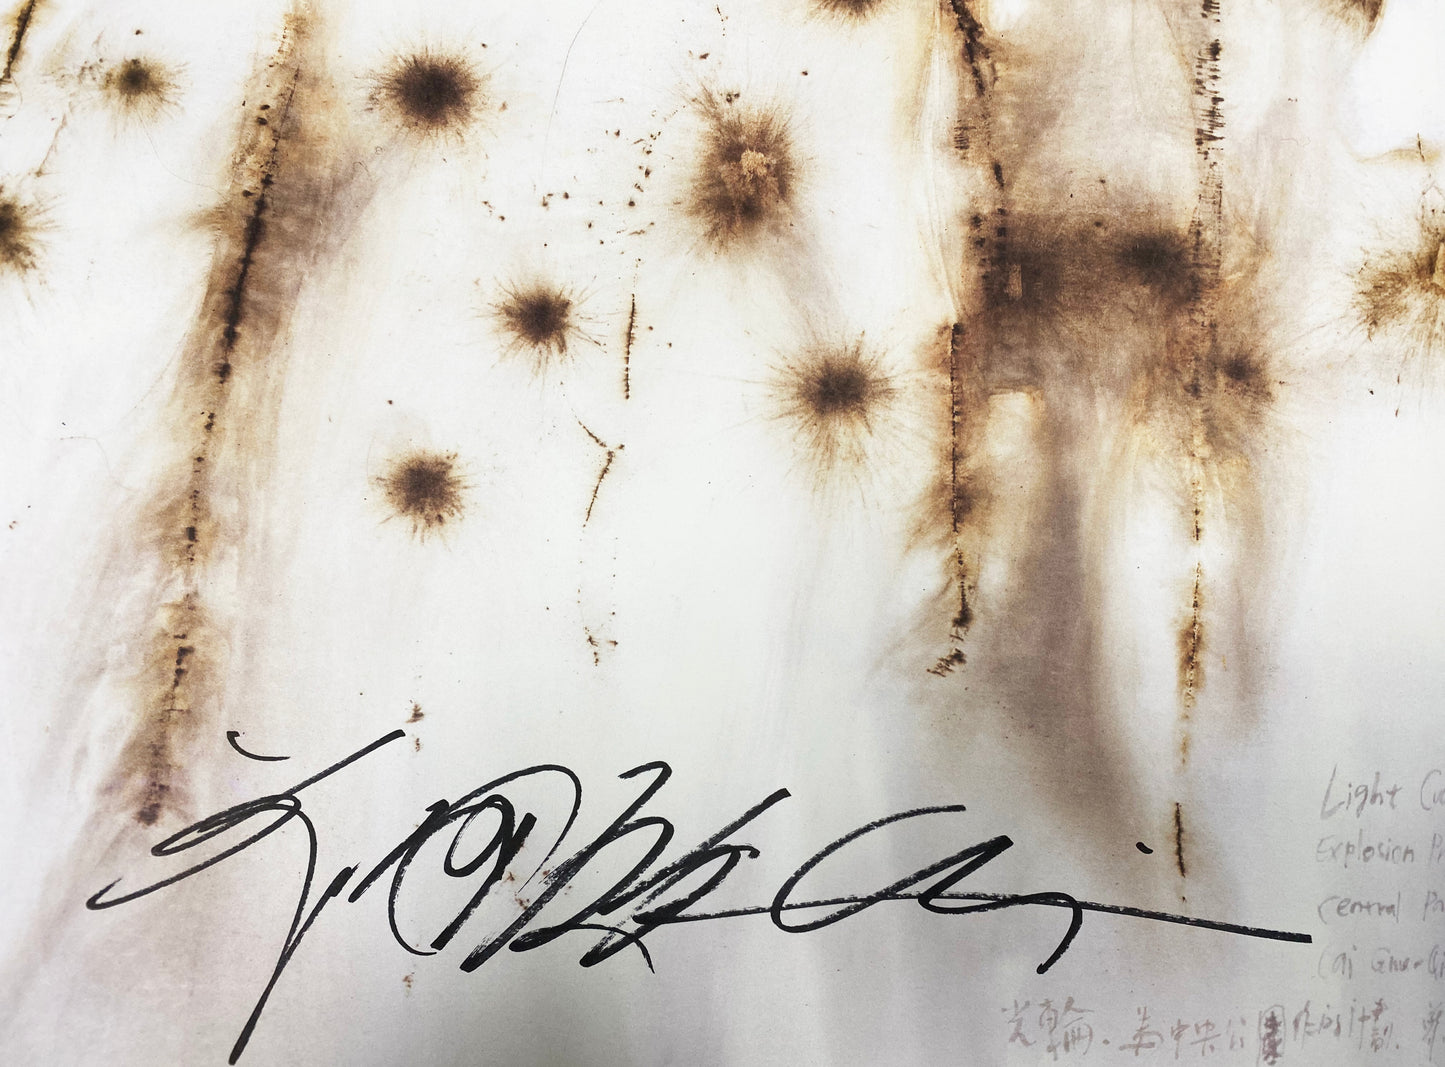 CAI GUO-QIANG - "An Explosion Event: Light Cycle over Central Park" Exhibition Poster ( Signed and Framed), 2005